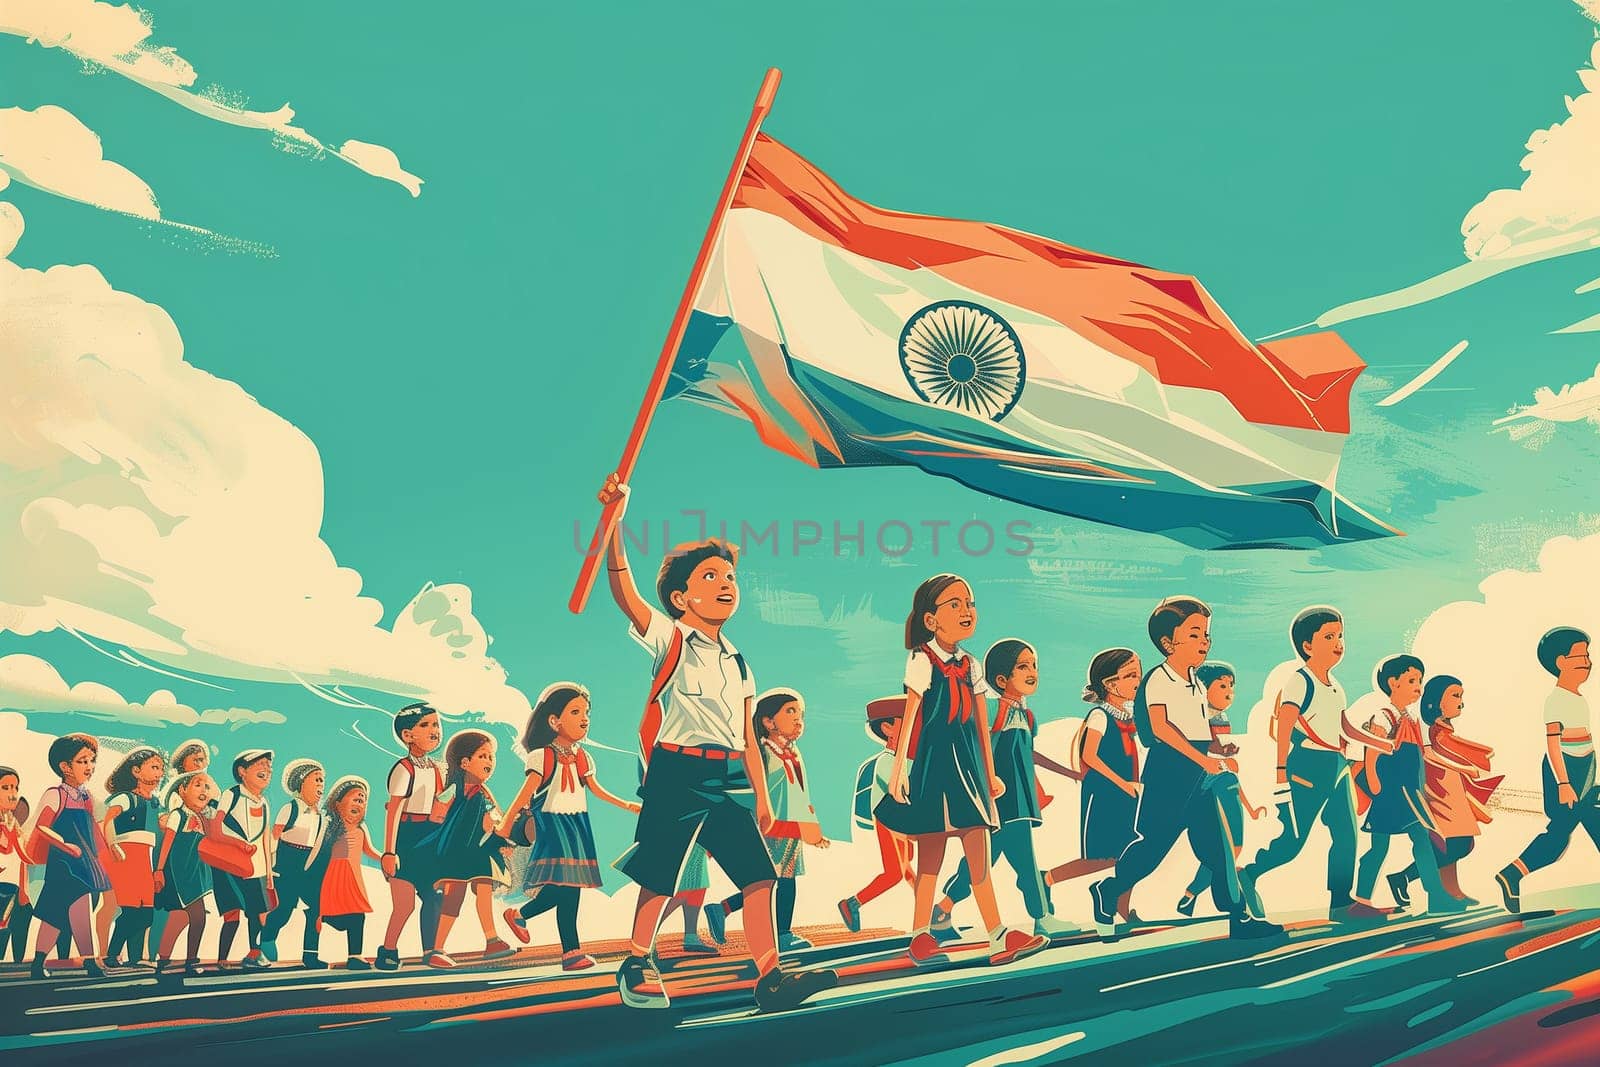 A group of children joyfully carrying the Indian flag.